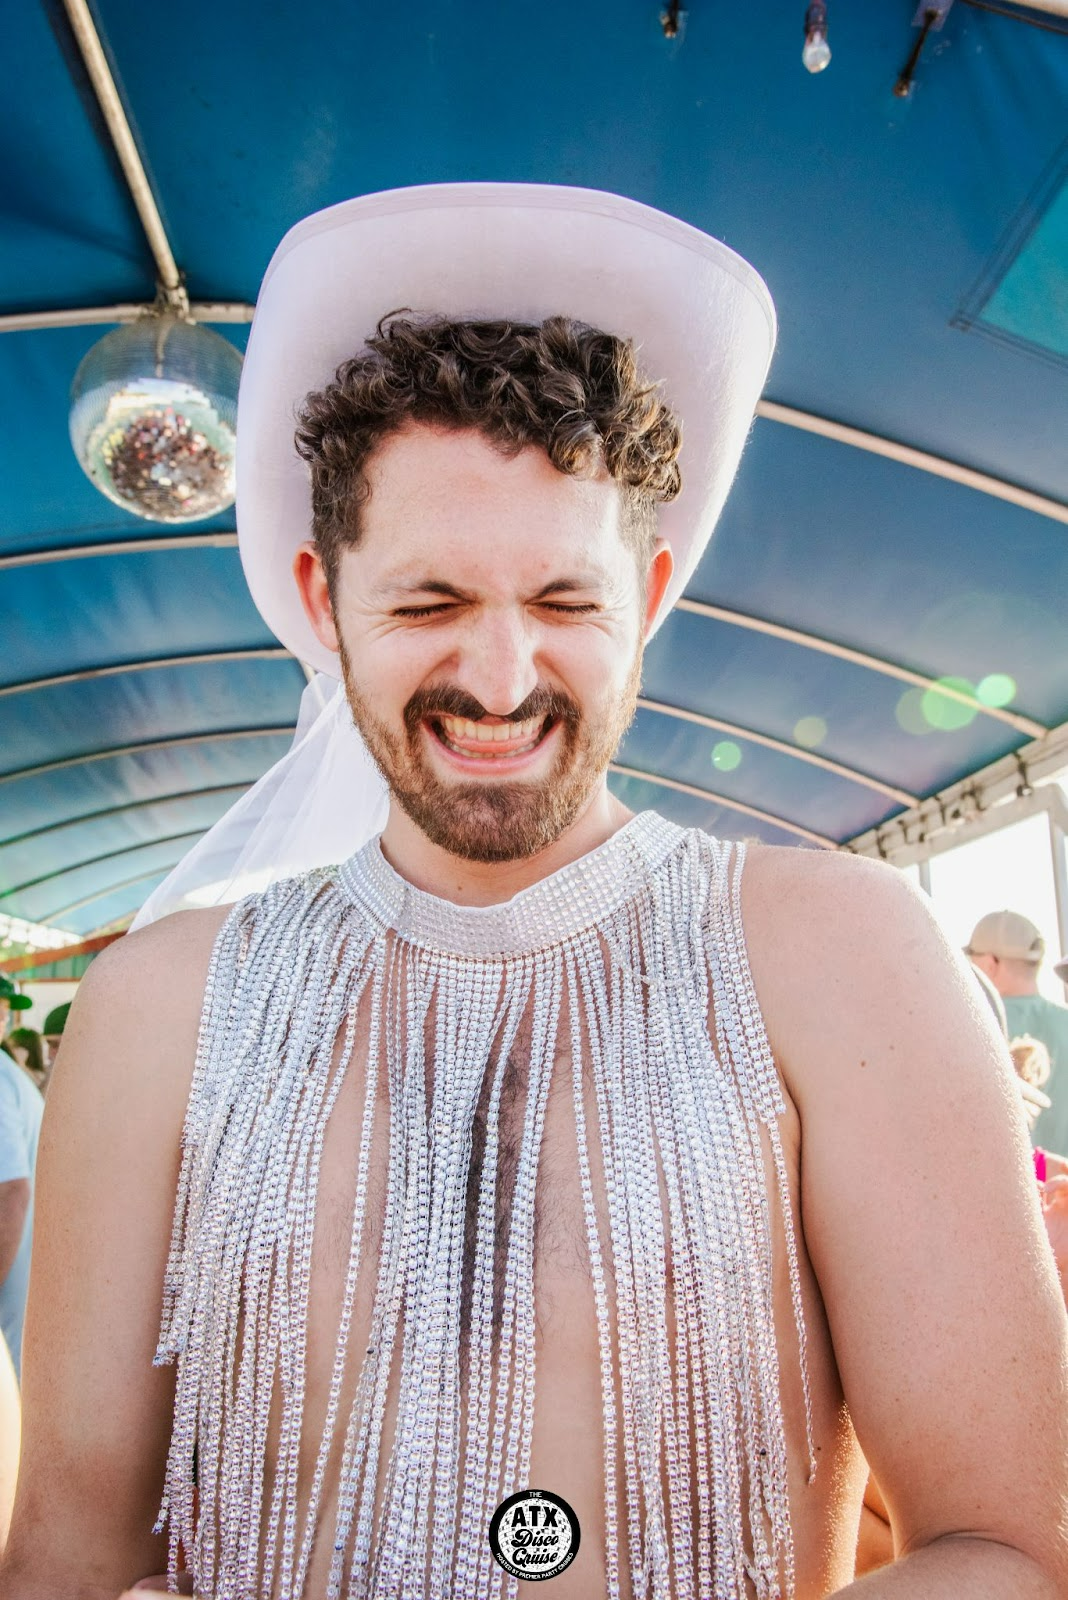 All smiles at a disco cruise at Premier Party cruises Austin